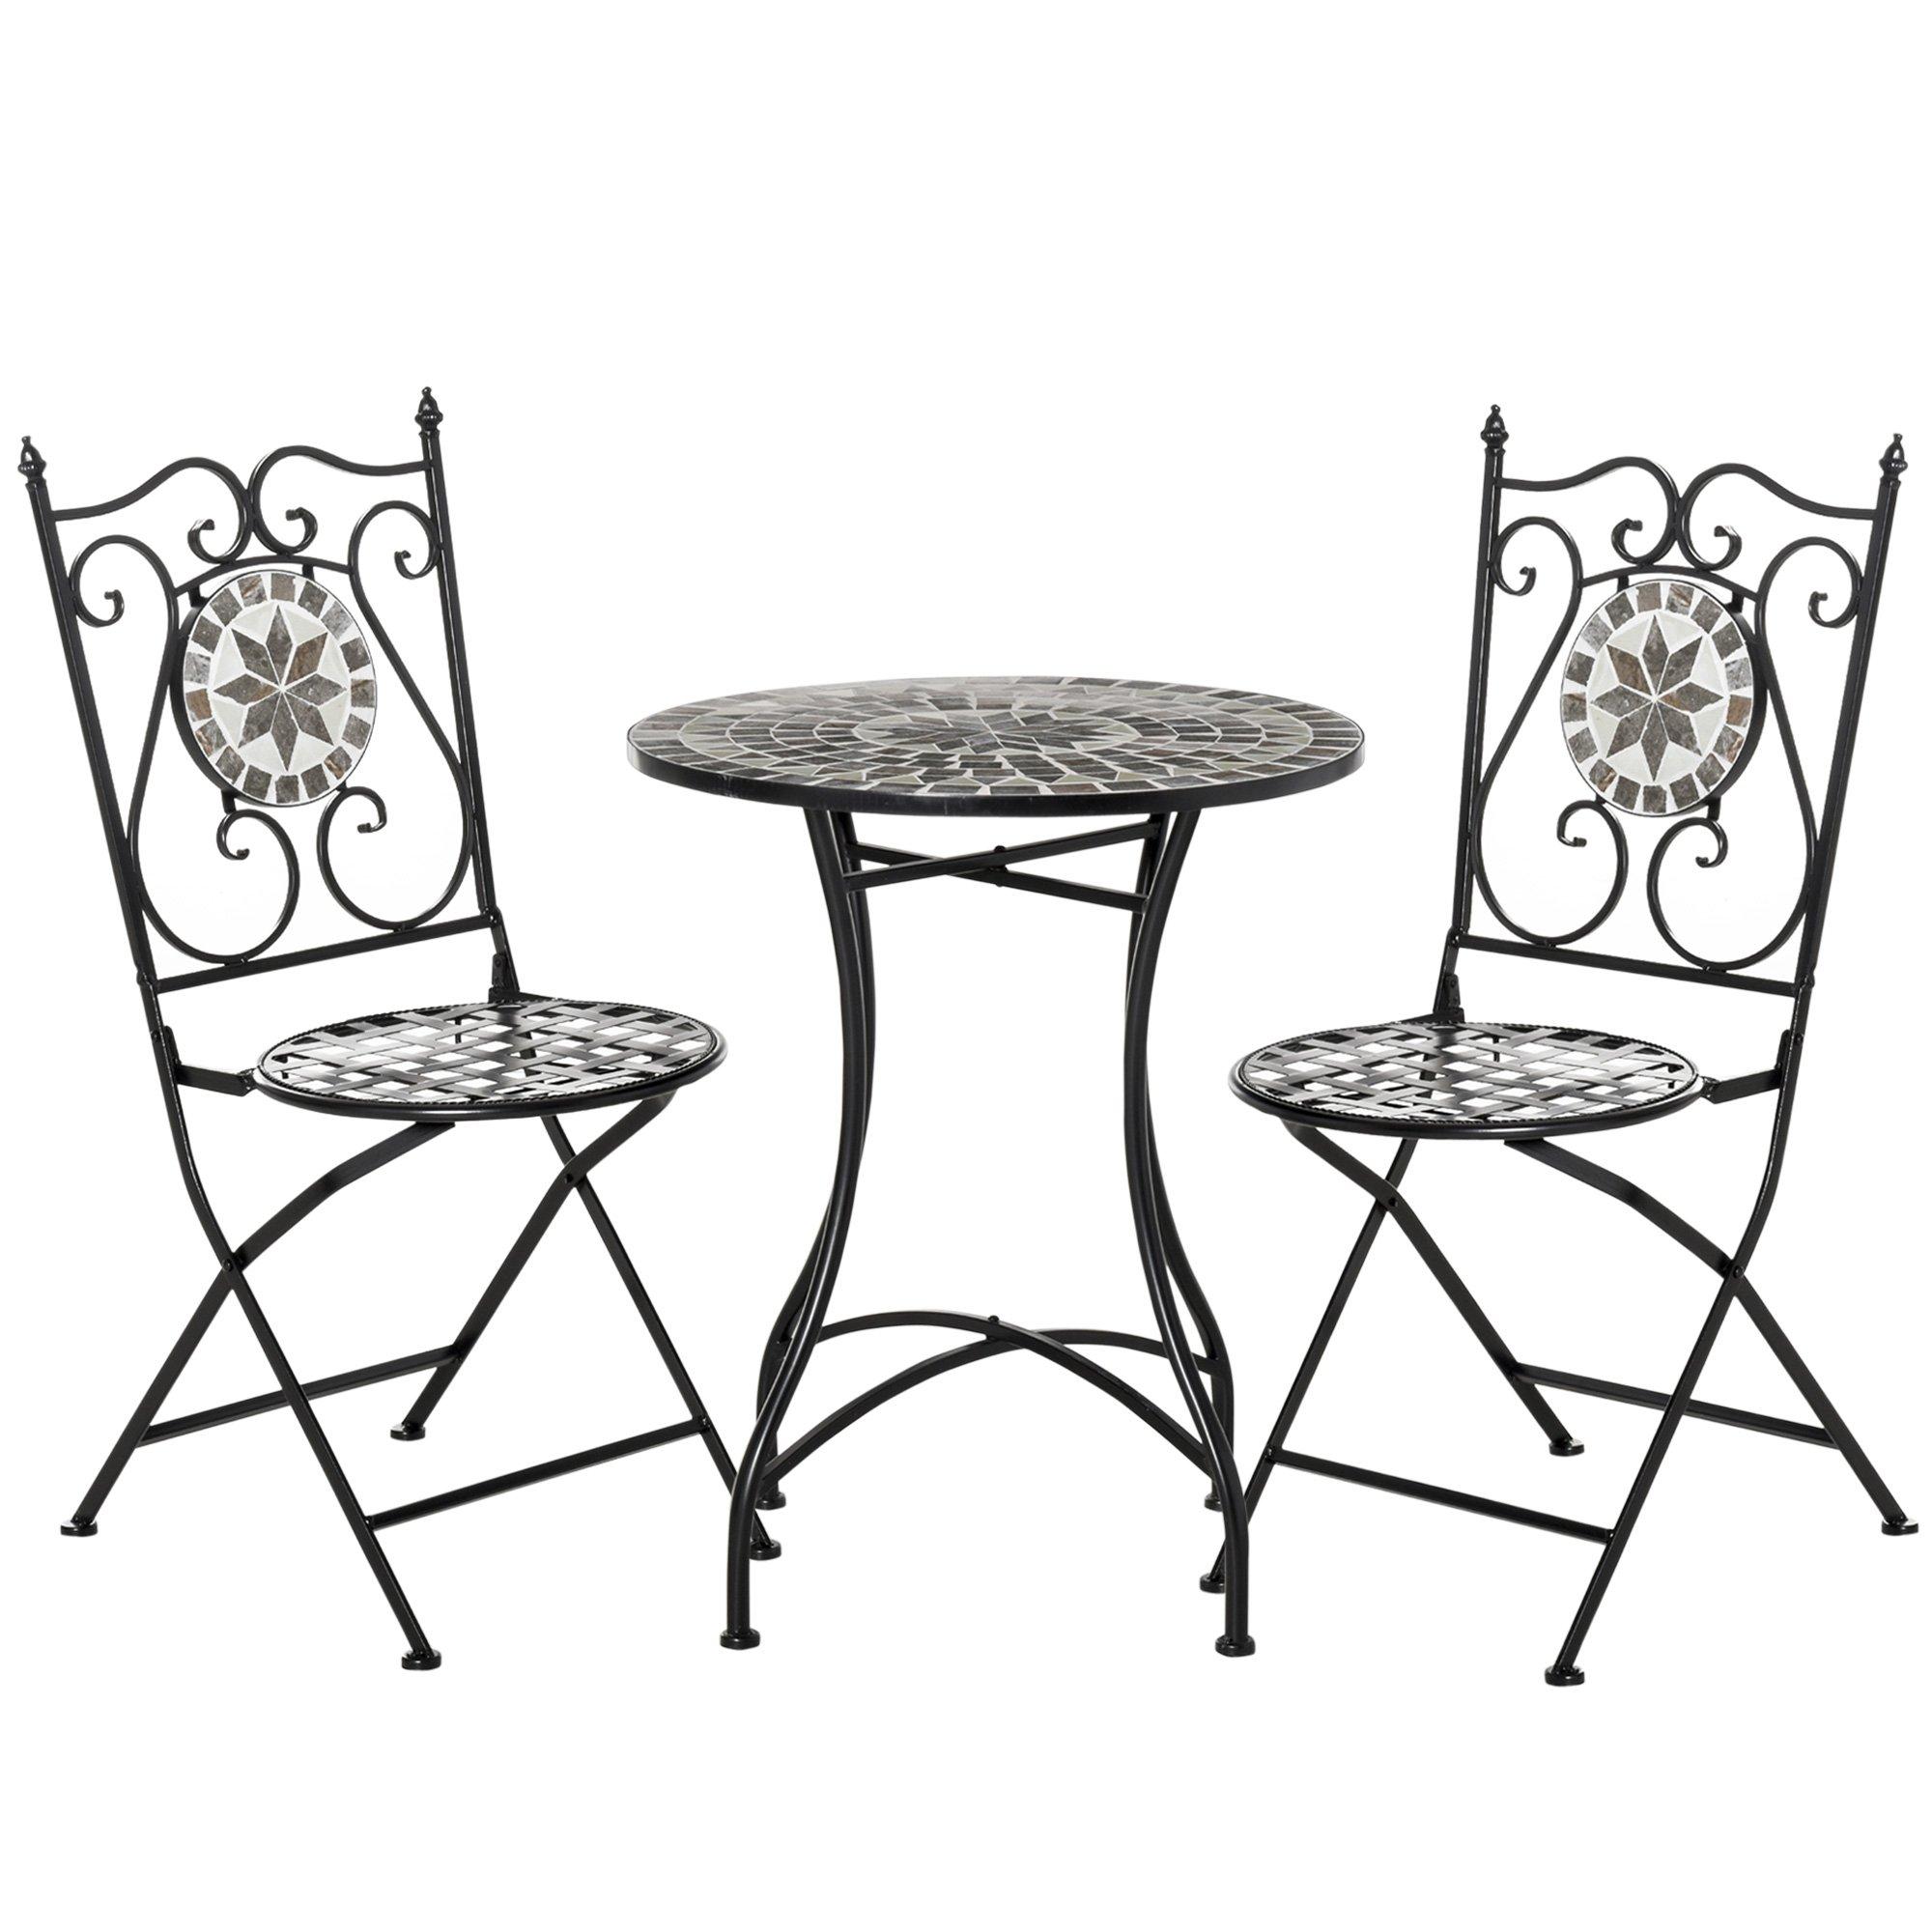 3 Pcs Mosaic Tile Garden Bistro Set Outdoorwith Table 2 Folding Chairs